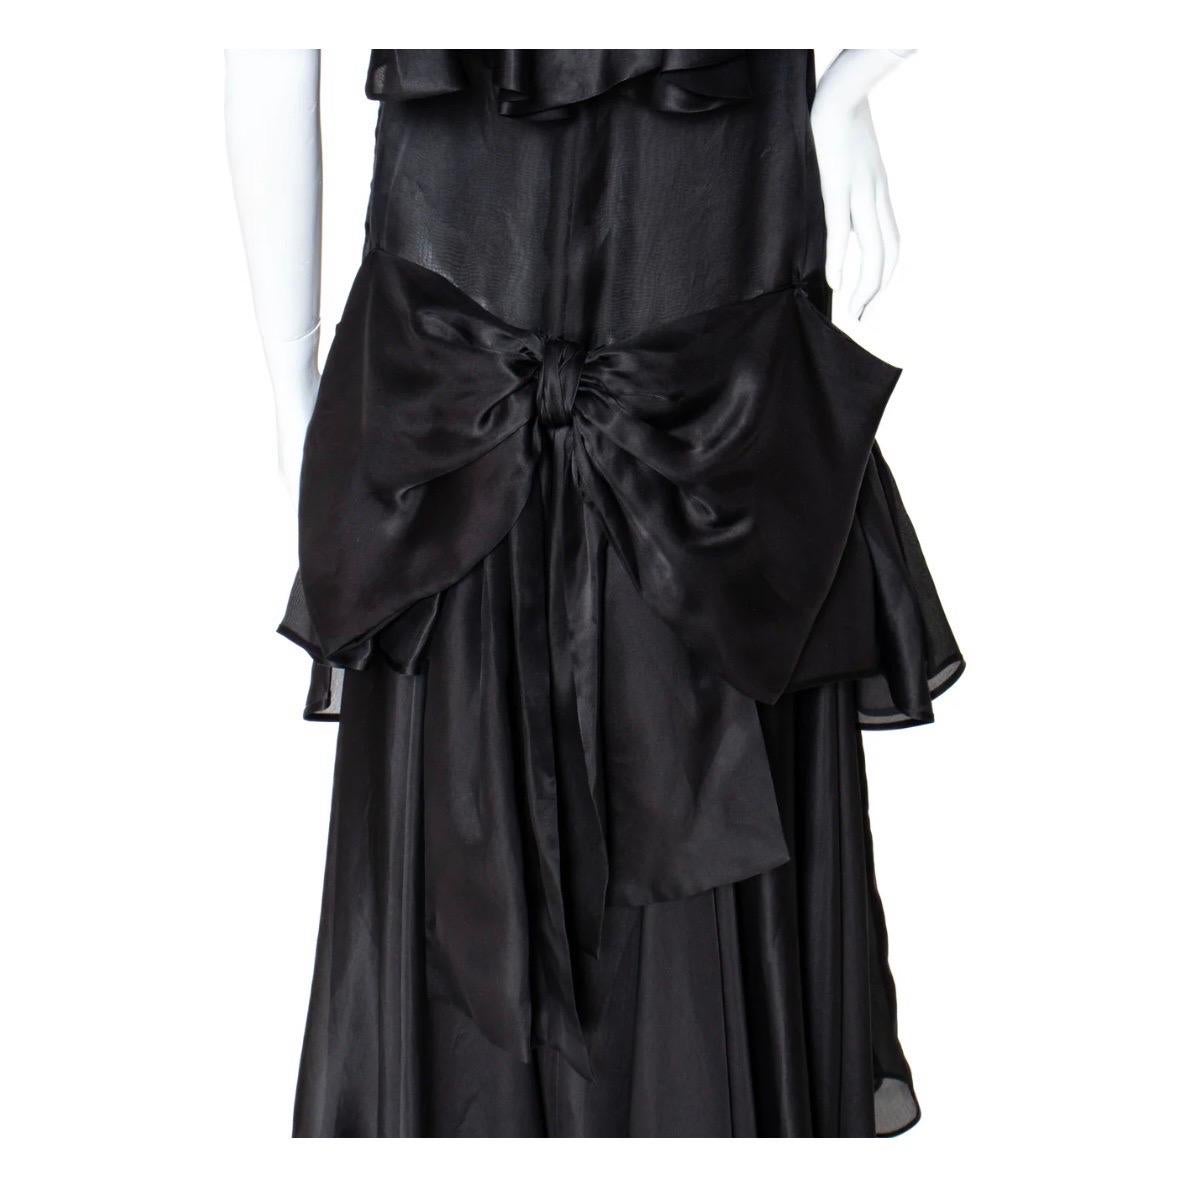 Yves Saint Laurent Haute Couture Ruffled Gown (1980s) For Sale 3